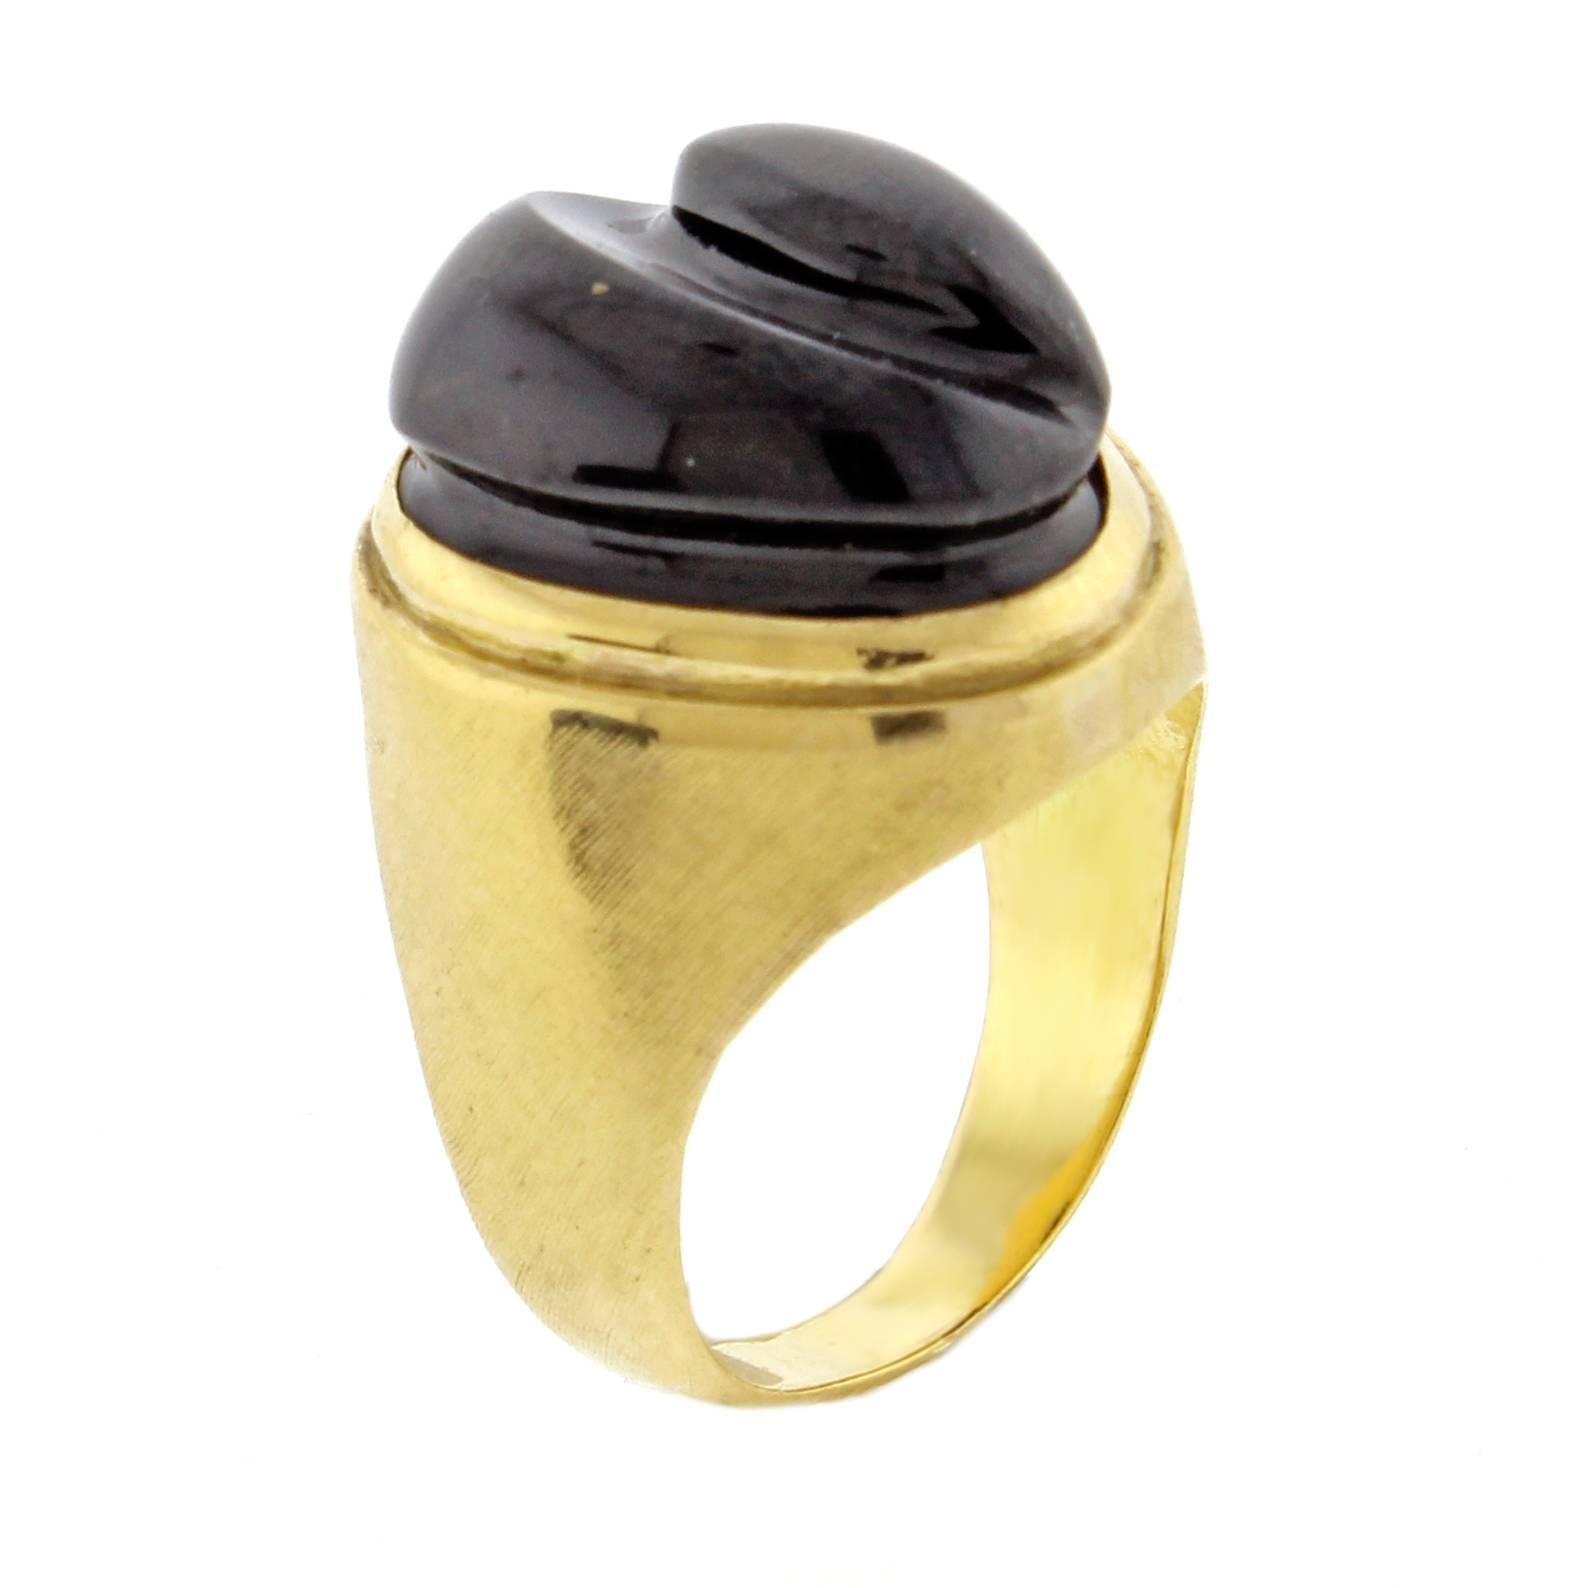 The ring features an intricately carved  blacktourmeline in the “forma livre” (free form) style. Haroldo Burle Marx was particularly known for his use of large gemstones. The Forma Livre shape is often fashioned by carving or tumbling the gemstone,a